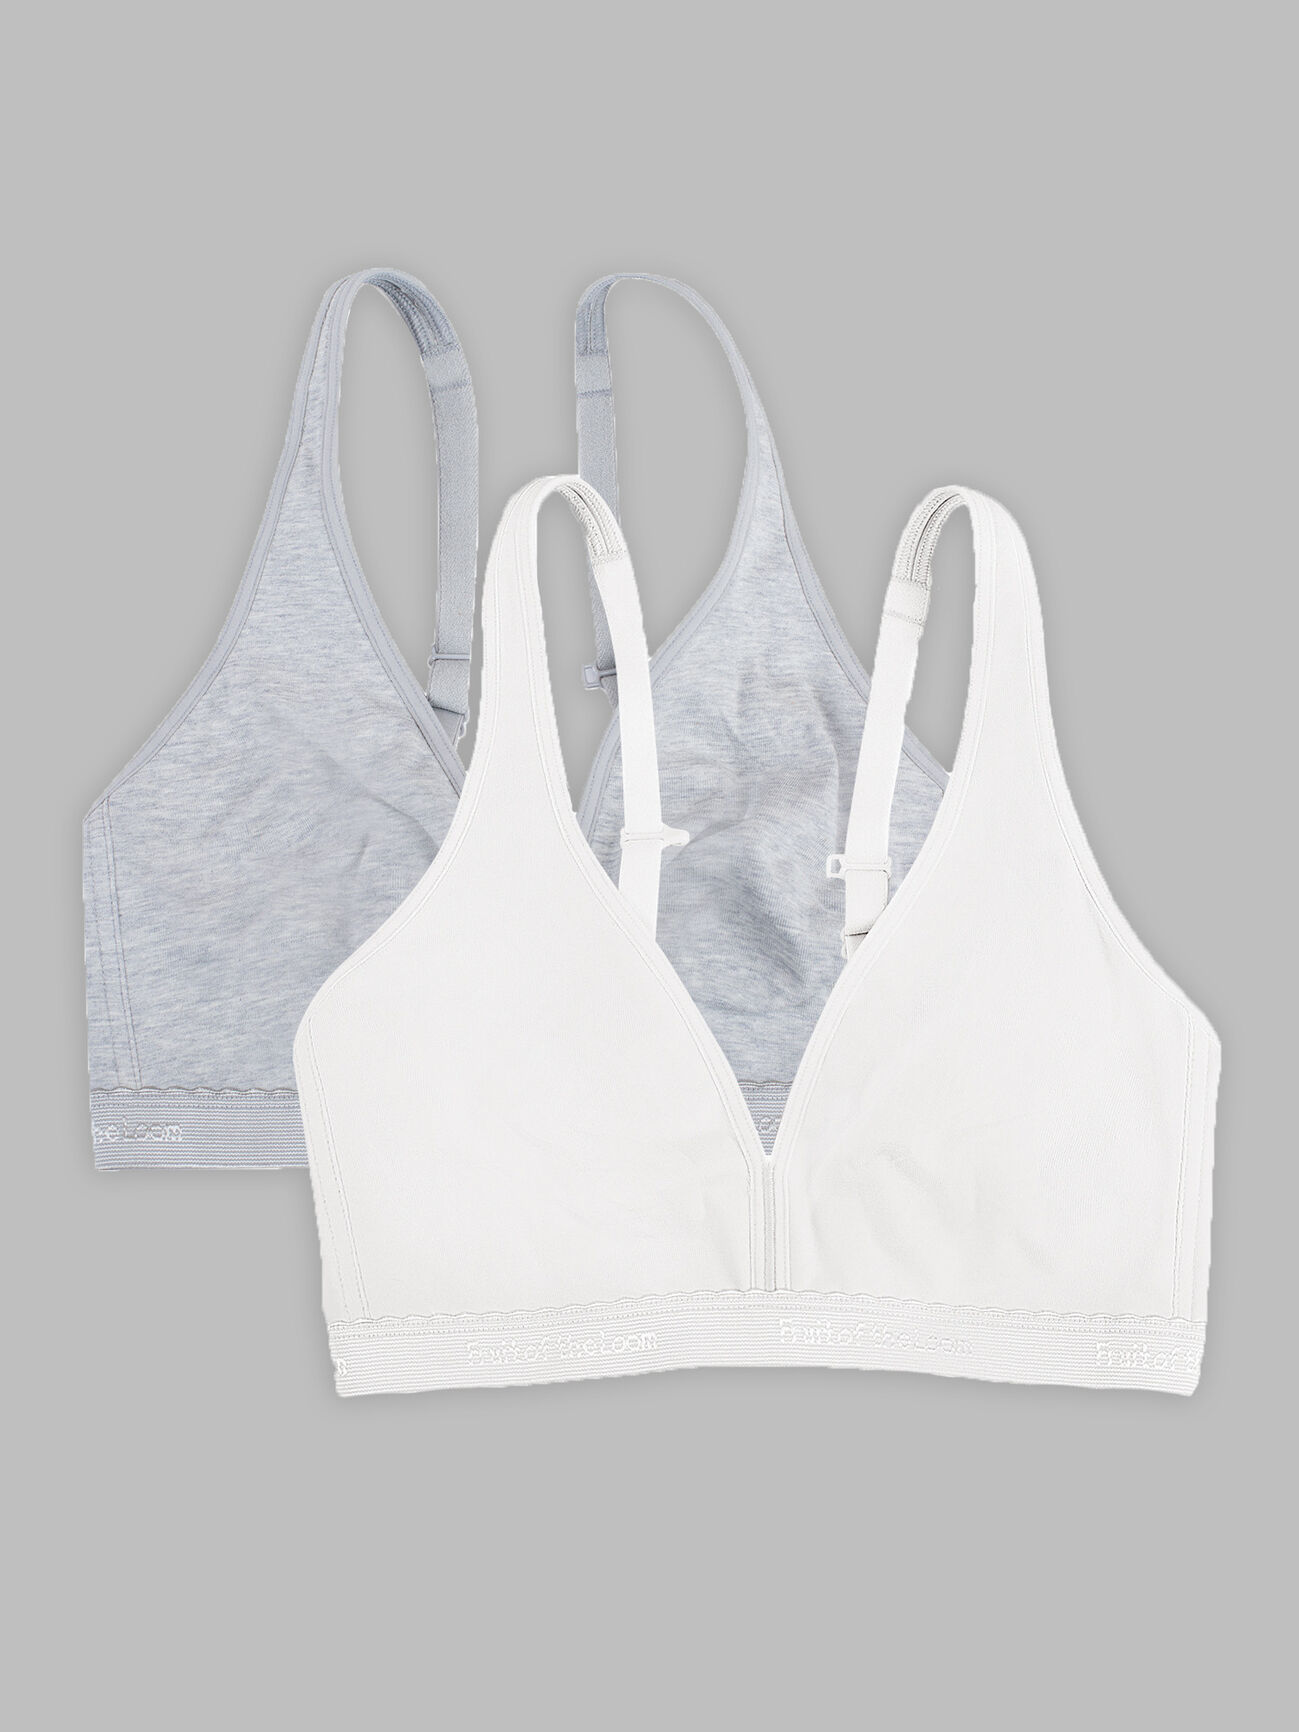 New Arrivals: Wire-Free Bralette In New Colors